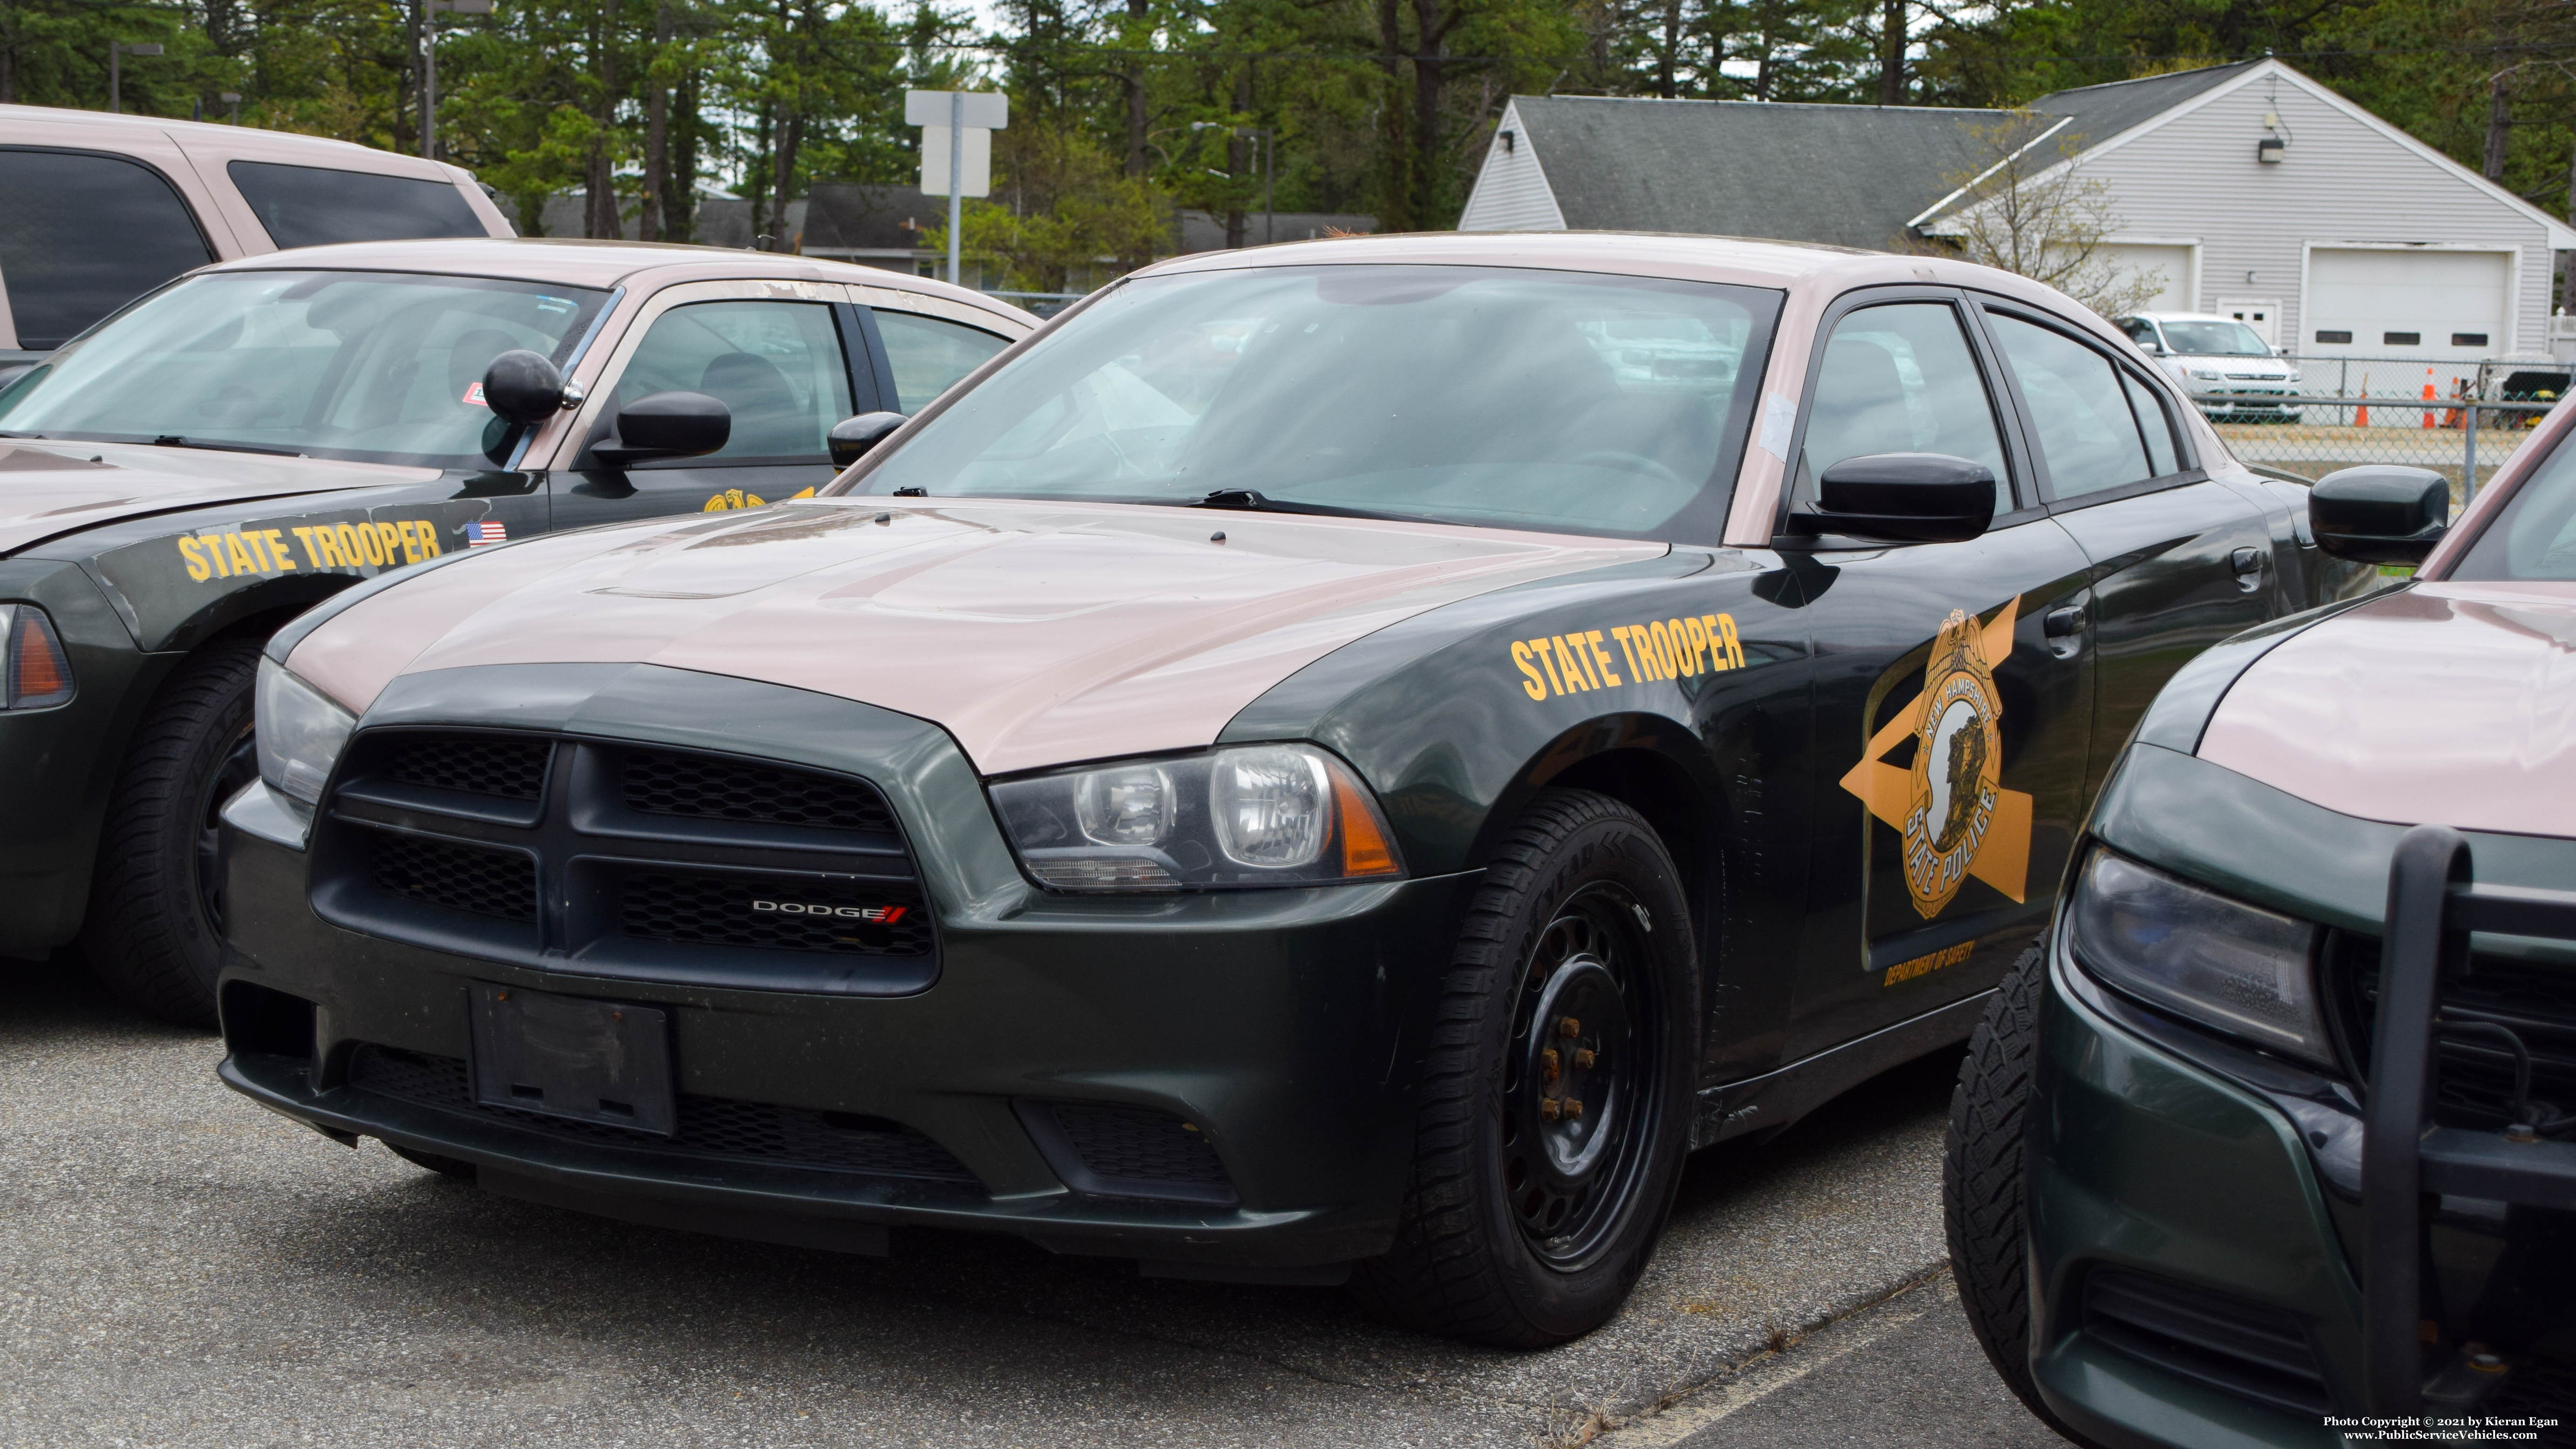 A photo  of New Hampshire State Police
            Unassigned Unit, a 2014 Dodge Charger             taken by Kieran Egan